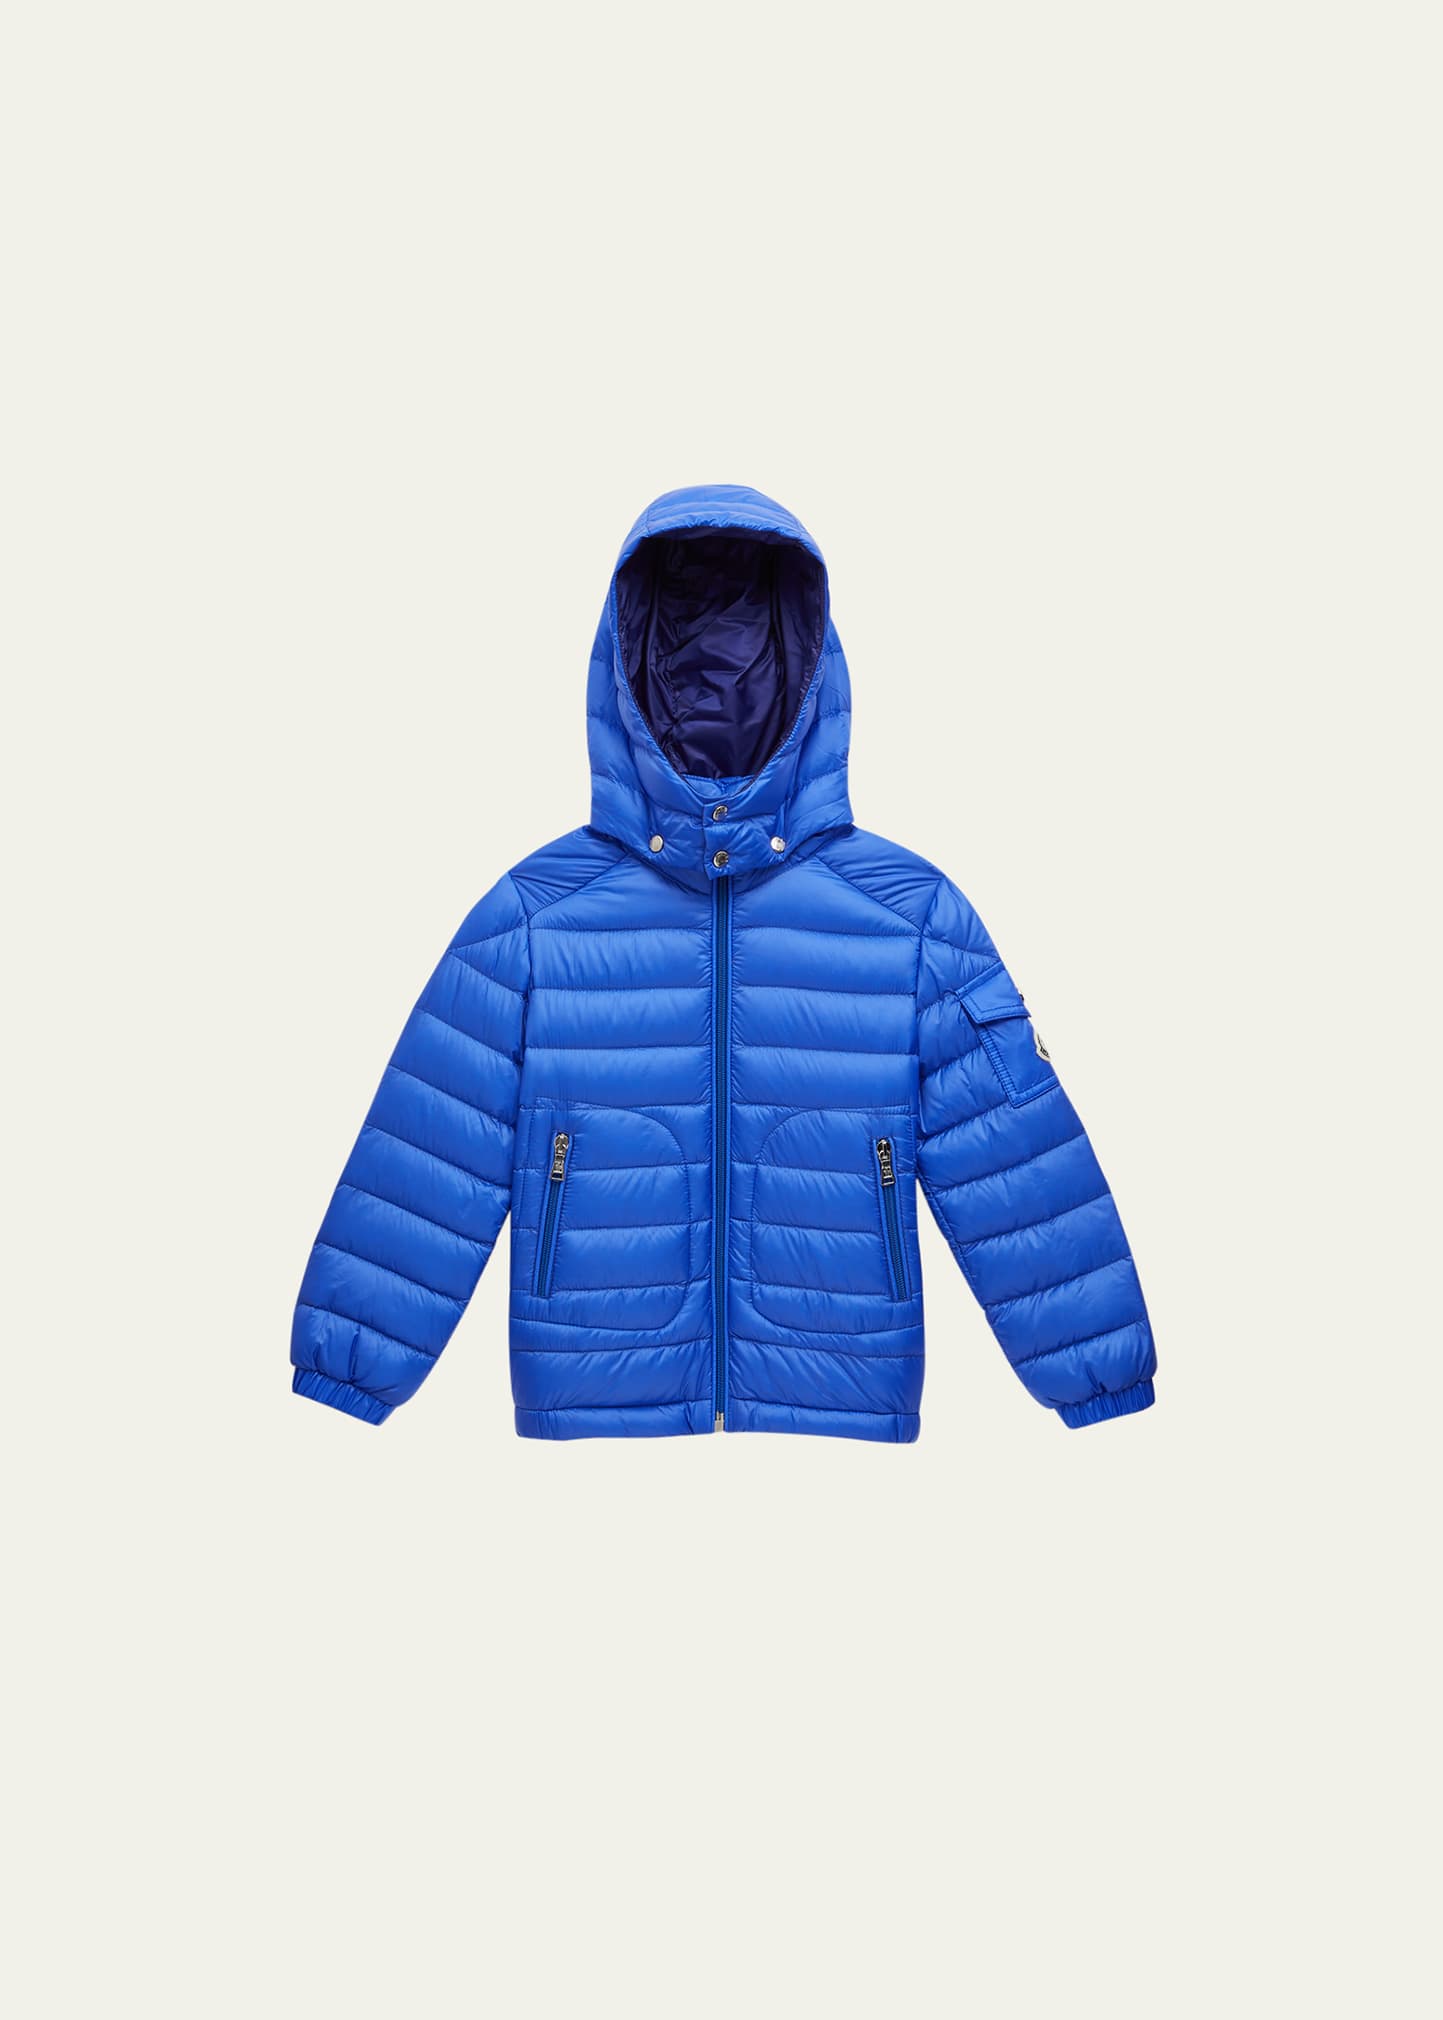 Moncler Kids' Boy's Lauros Puffer Jacket In Bright Blue